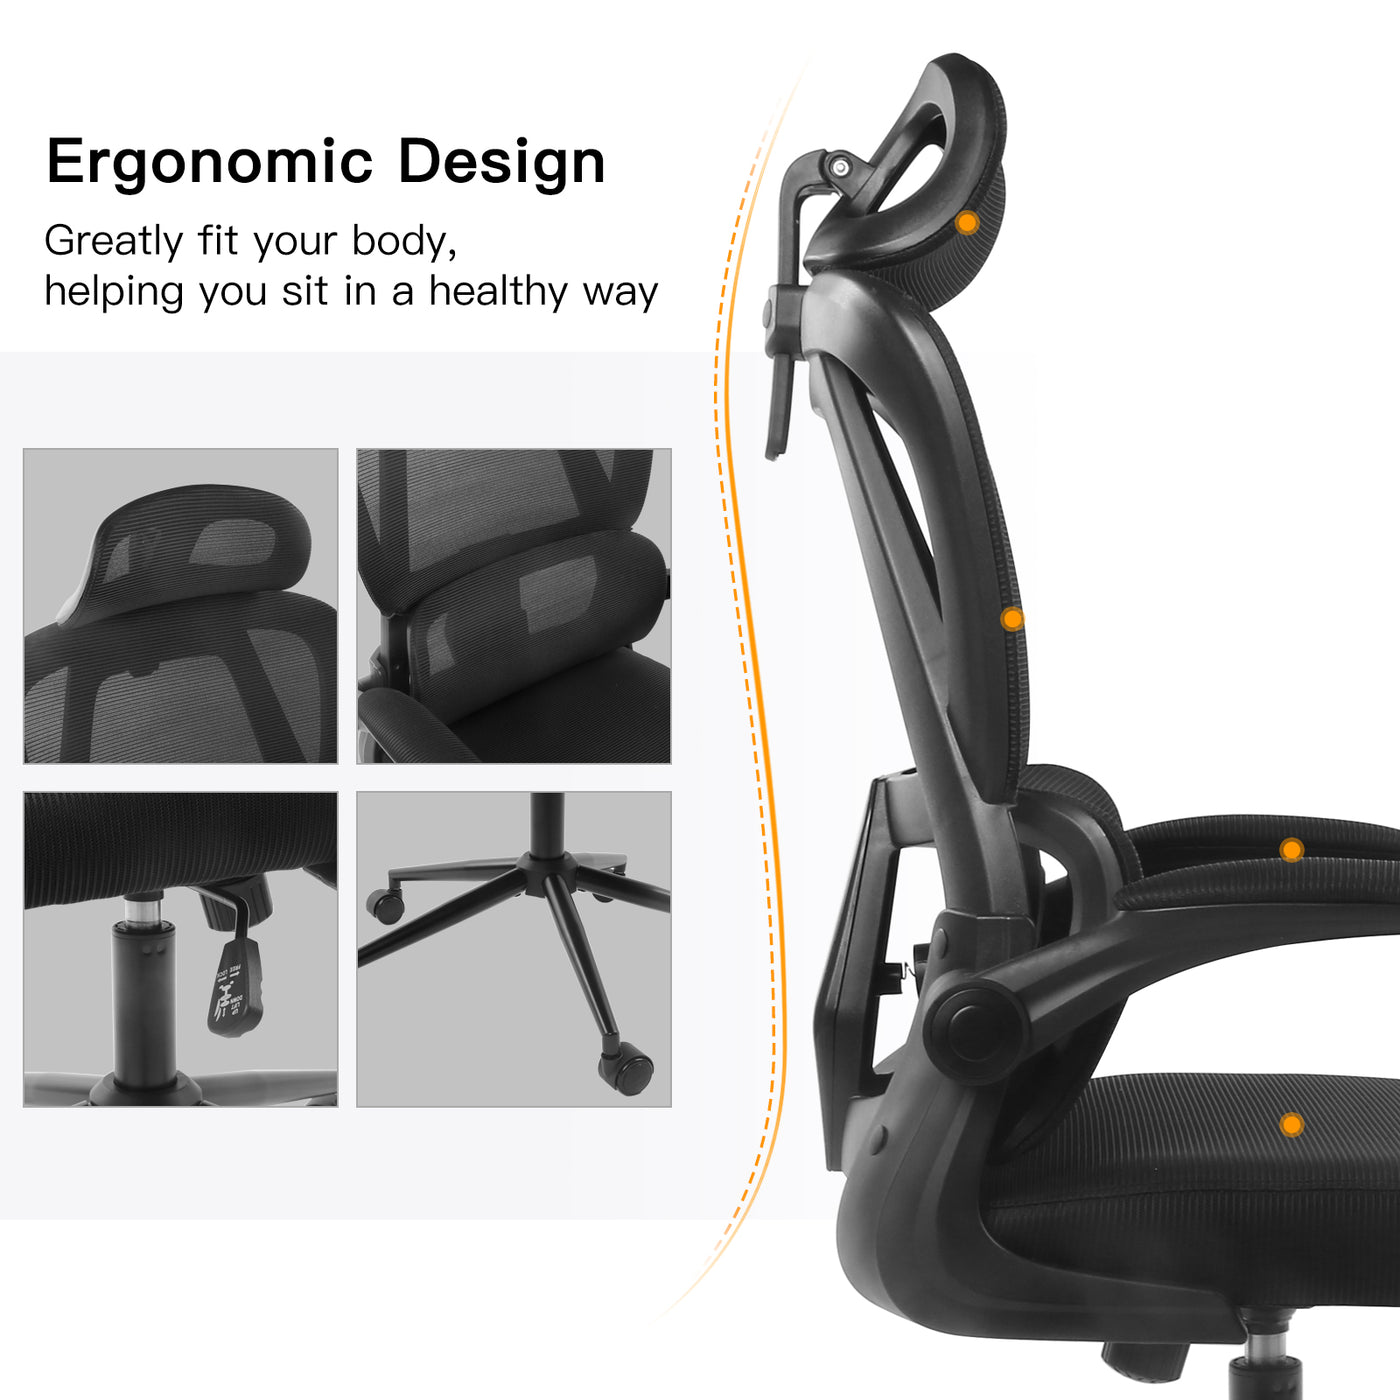 Ergonomic Office Chair Height Adjustable Seat Swivel Computer Chair Breathable Mesh Chair with Flip-up Armrest, Lumbar Support, Adjustable Headrest